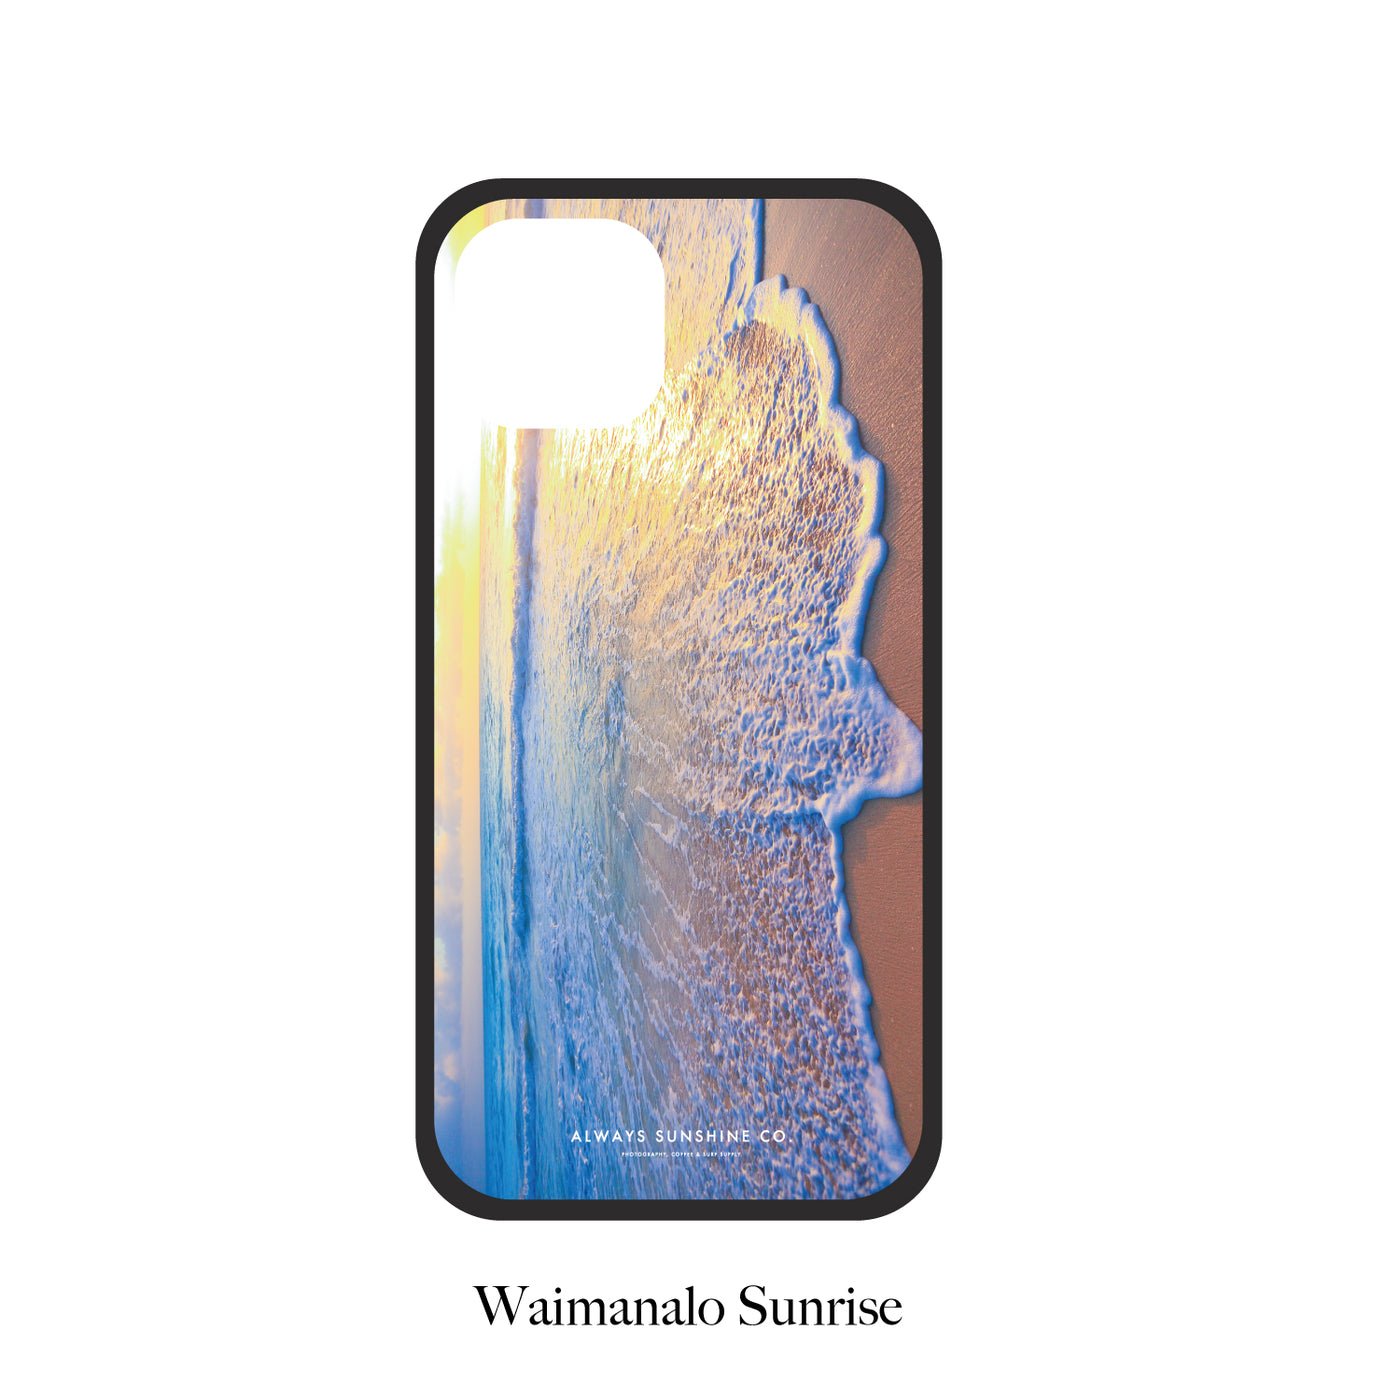 【PAGE 2】完全受注オーダー Glass Photo iPhone Cover -HAWAII-48種類